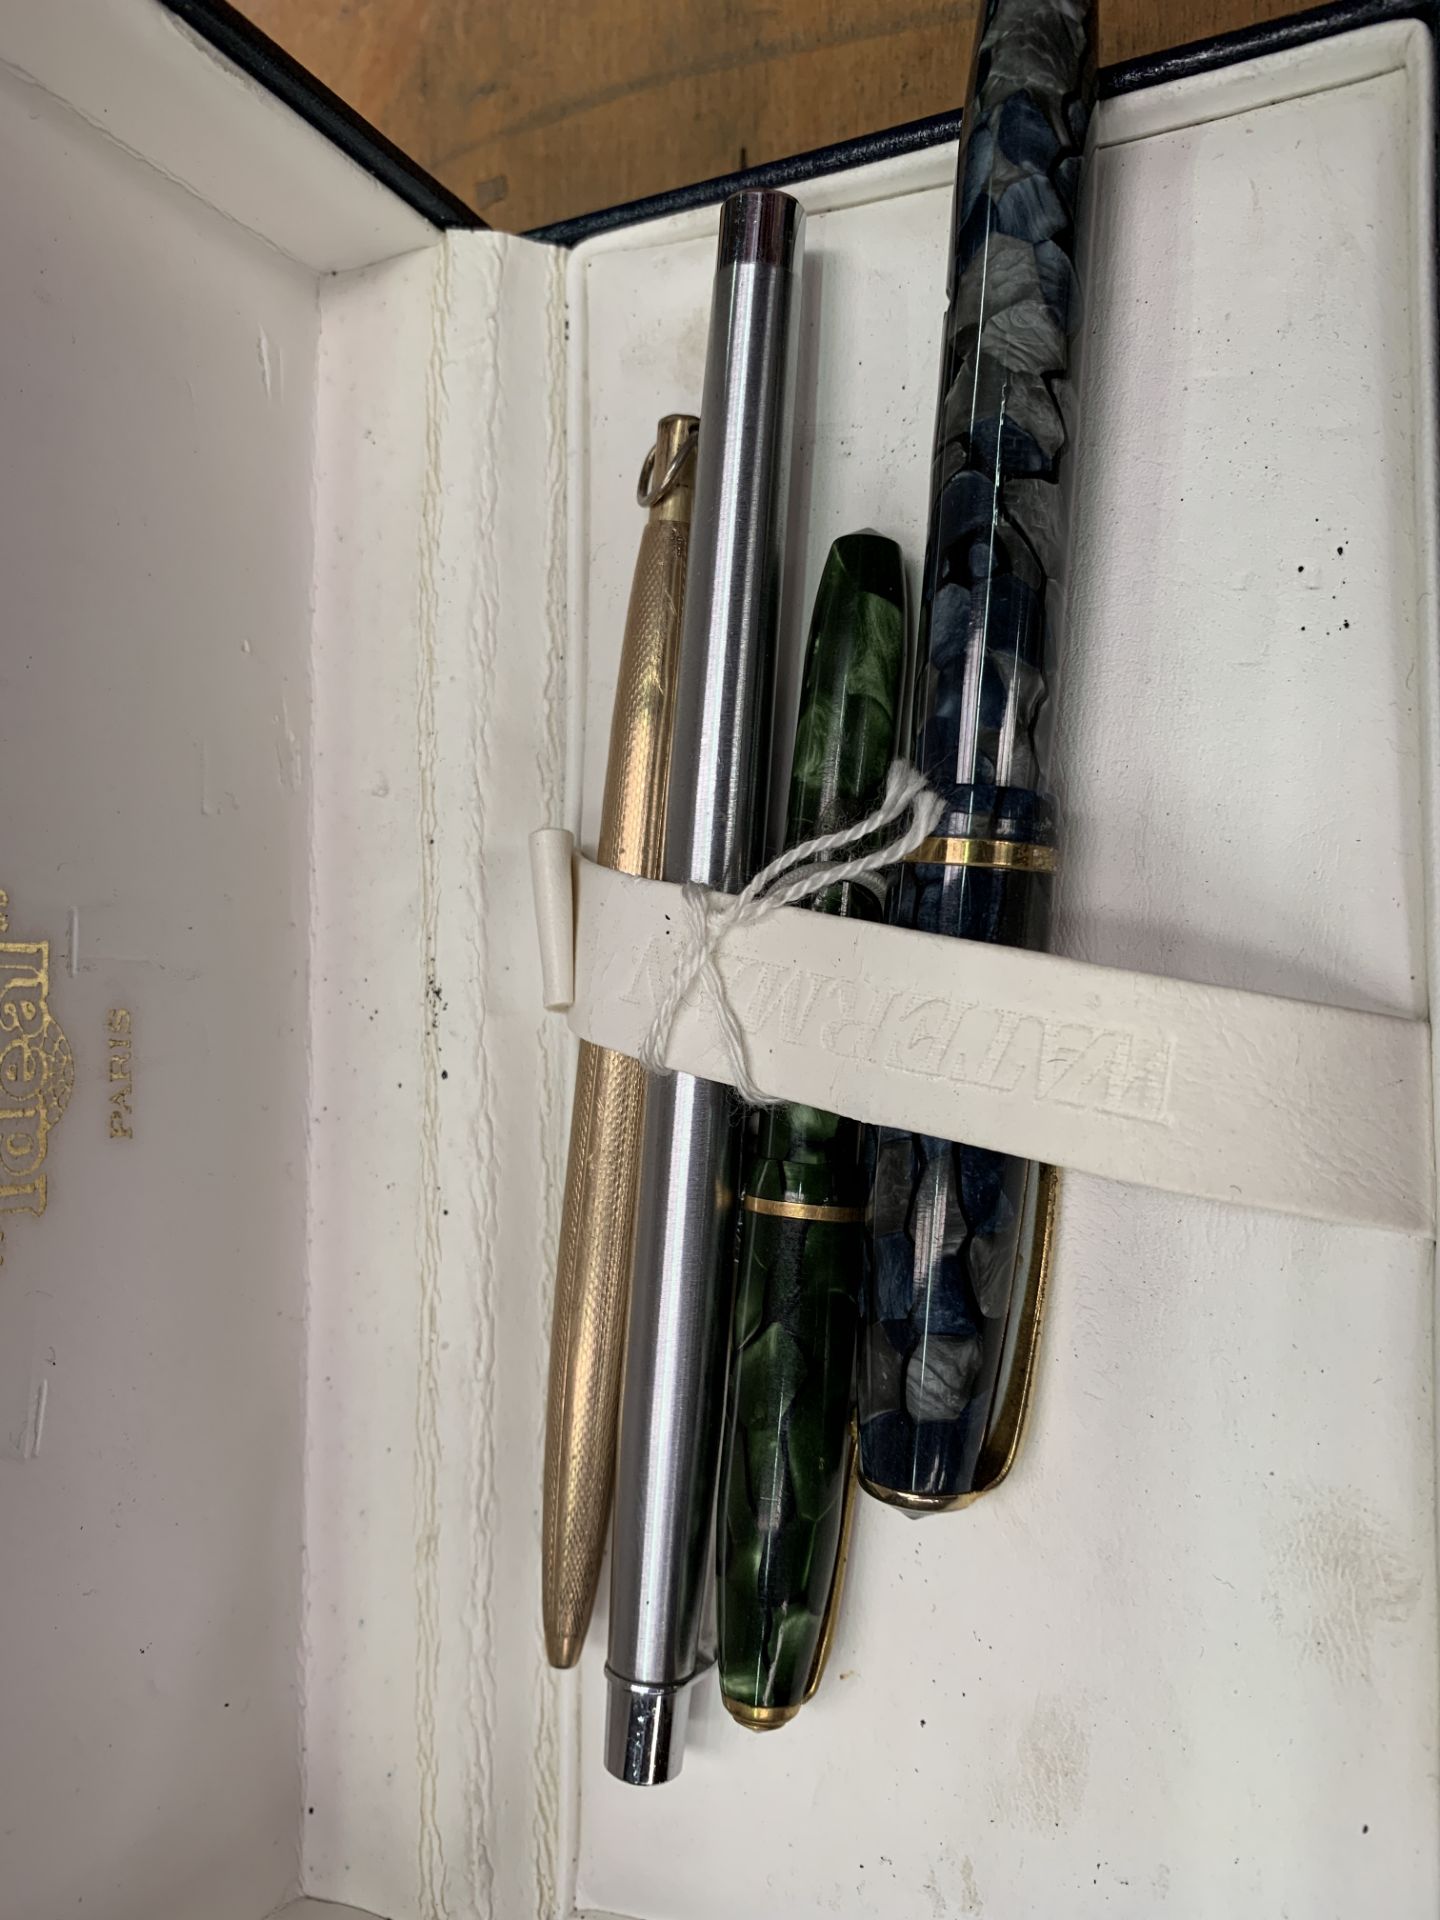 Waterman fountain pen with 18ct gold nib and other pens - Image 3 of 3